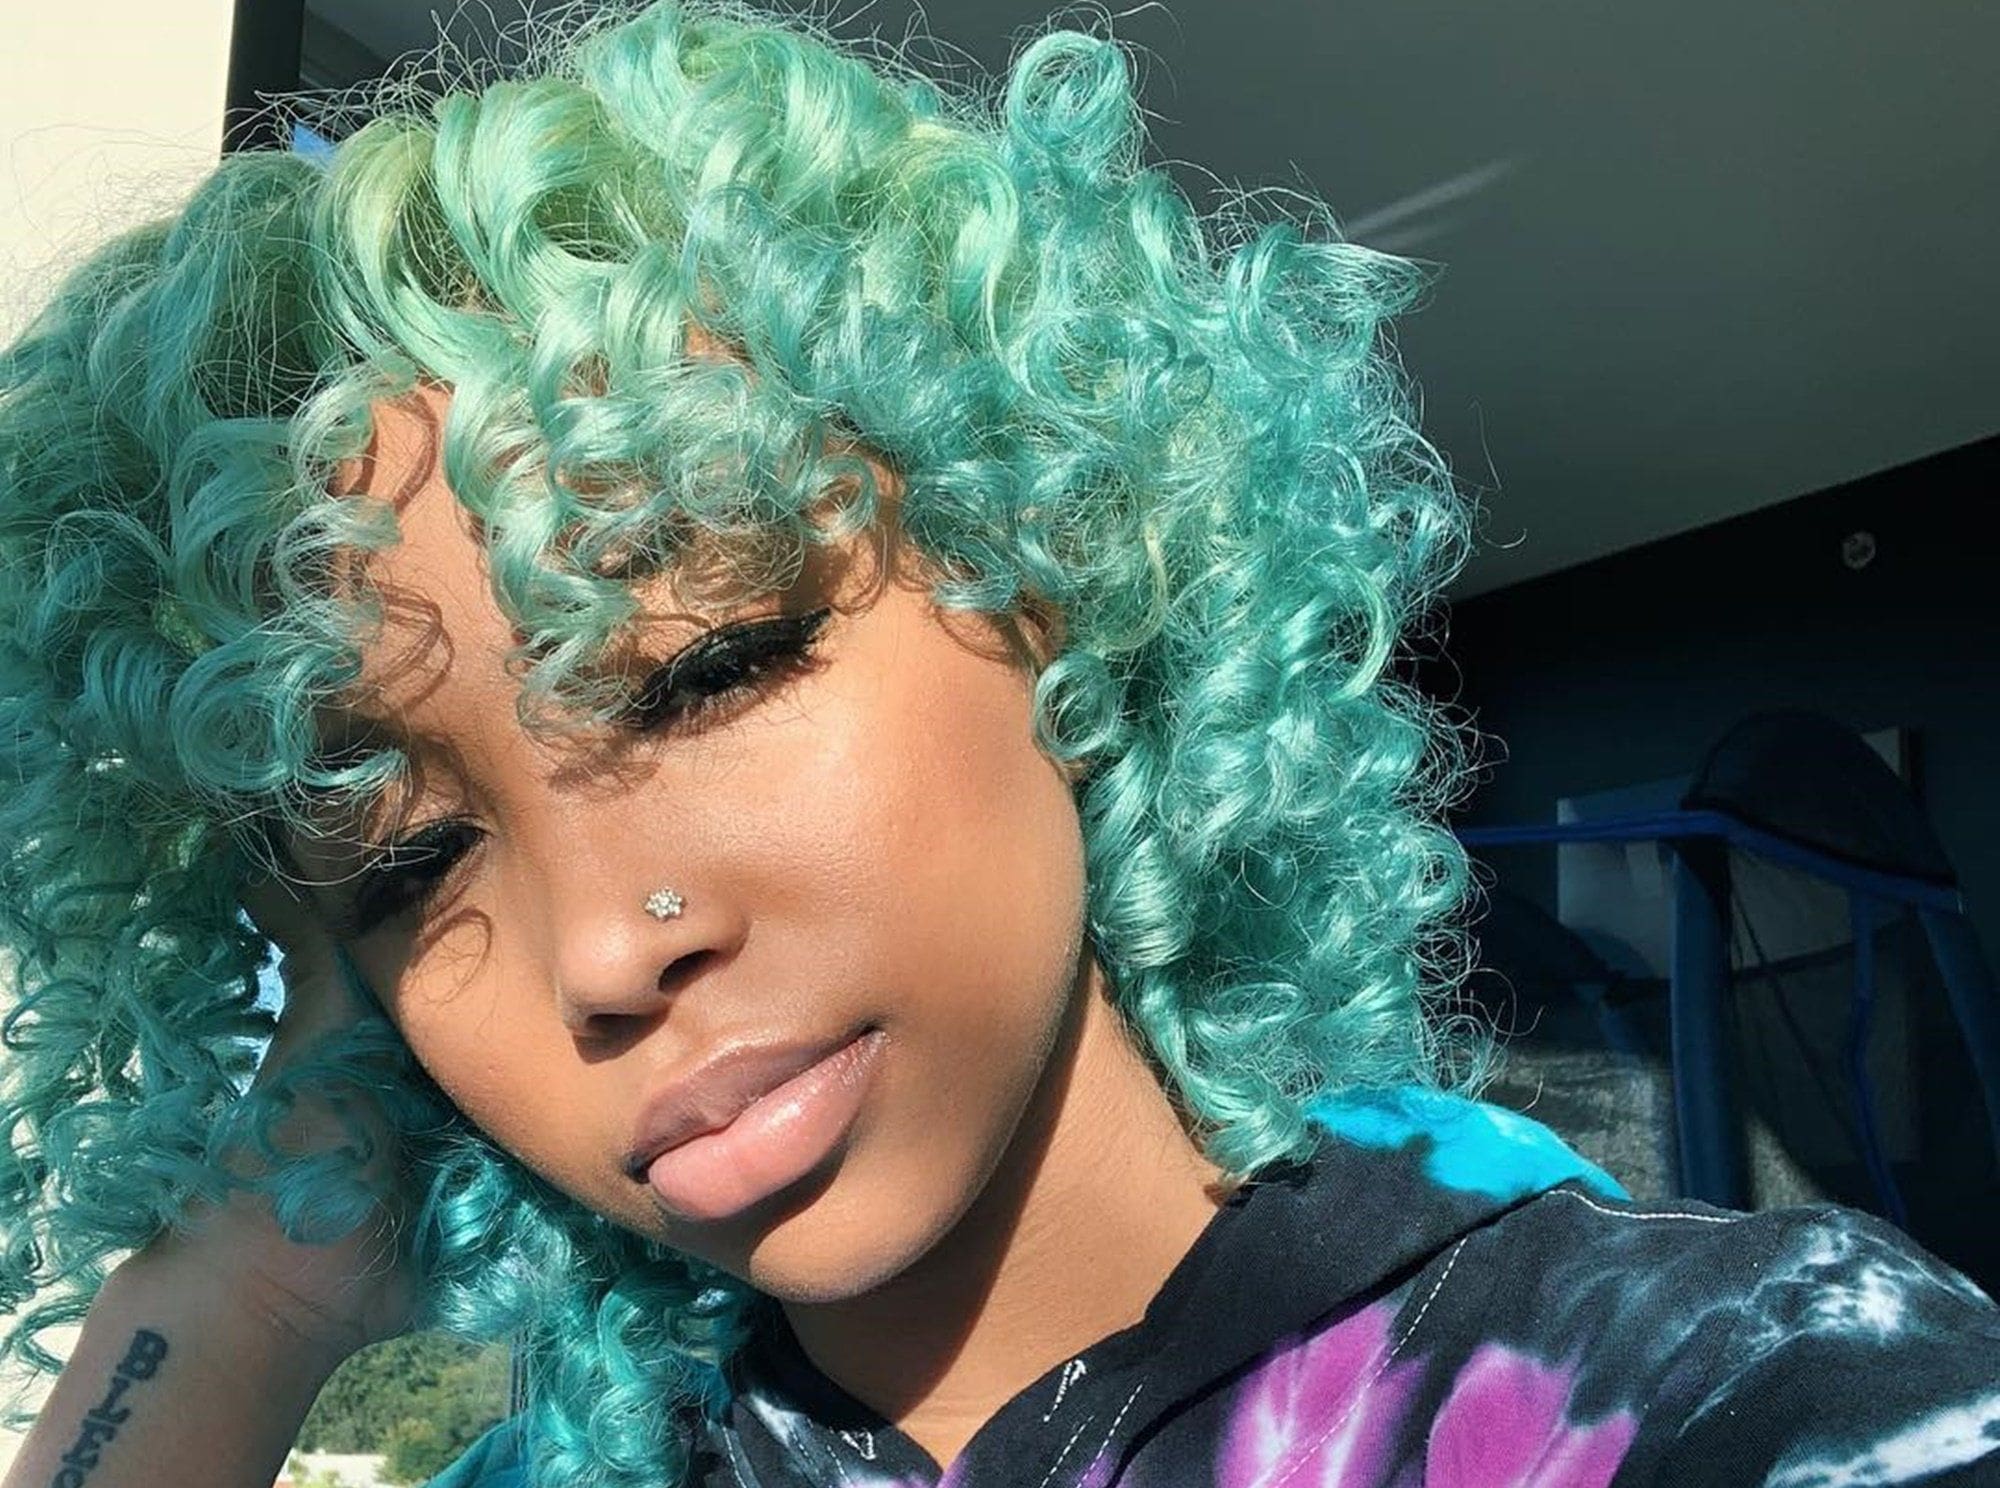 Tiny Harris' Daughter, Zonnique Pullins Is Doing A Massive Cash App Giveaway